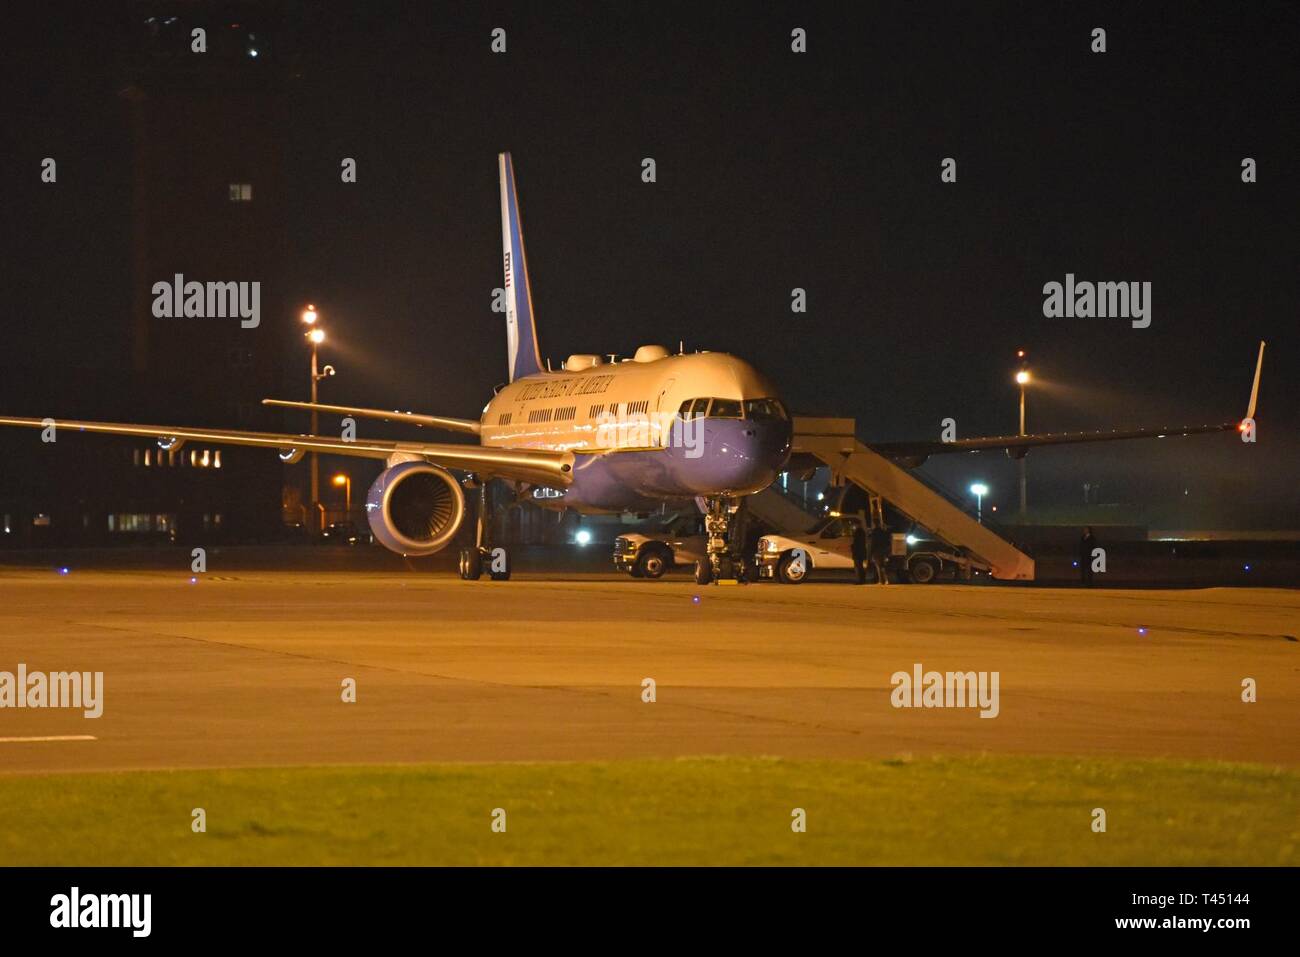 A Boeing C-32, known as “Air Force Two” receives fuel during a stop at RAF Mildenhall, England, Feb. 26, 2019. Along with Air Force One and an E-4B National Airborne Operations Center, the aircraft were in route to Hanoi, the capital city of Vietnam, for President Donald J. Trump’s second summit with North Korean leader Kim Jong-Un. Stock Photo